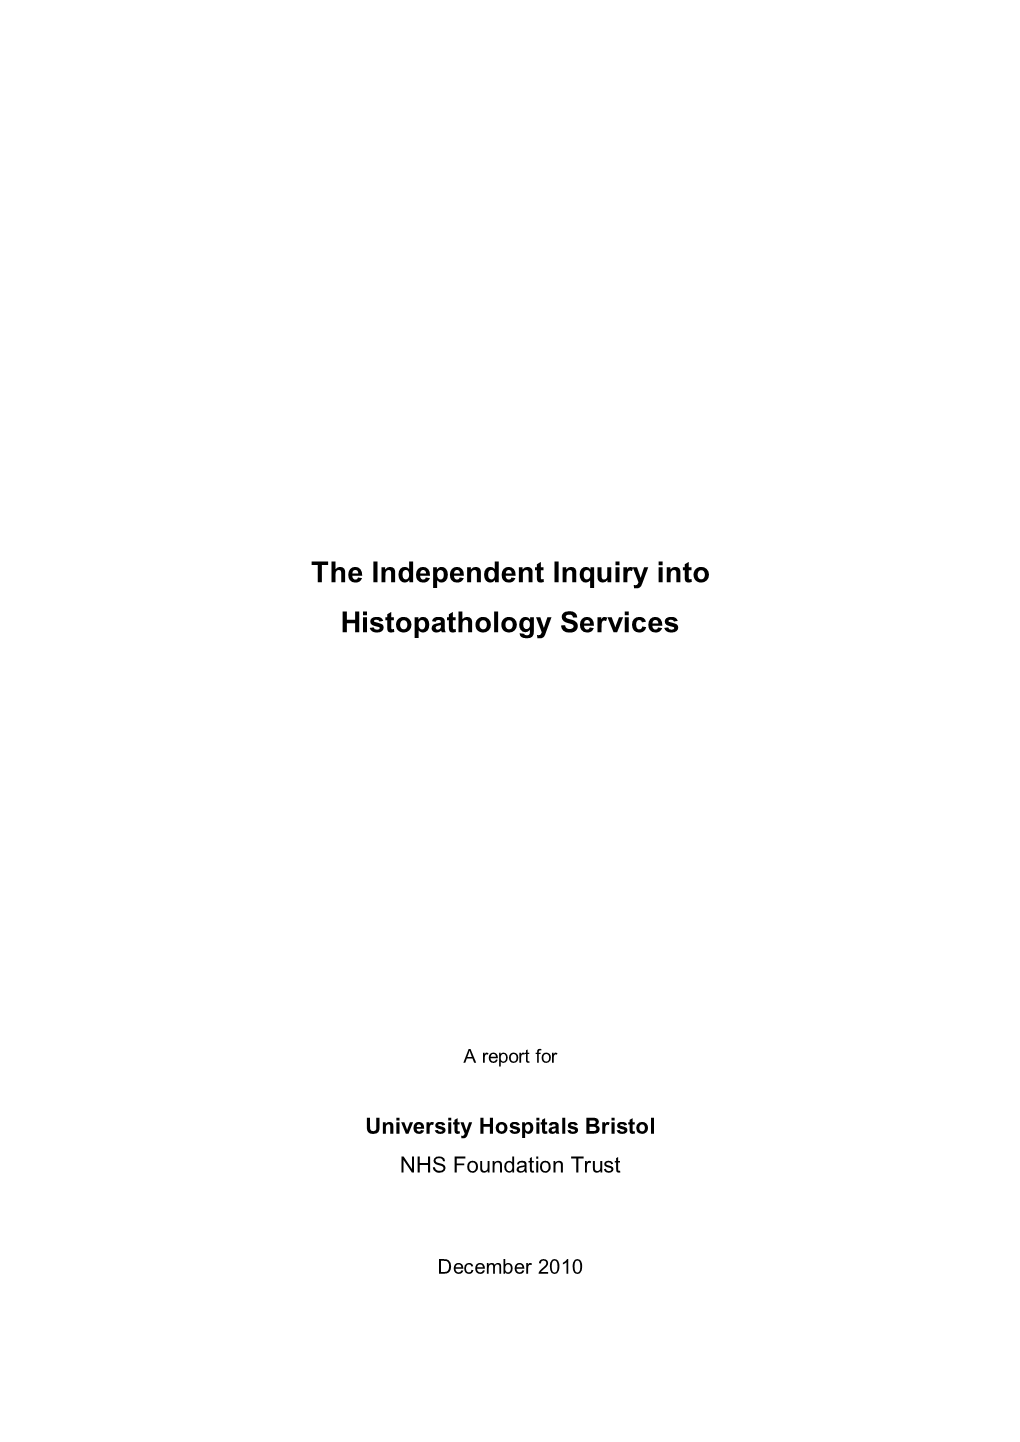 The Independent Inquiry Into Histopathology Services